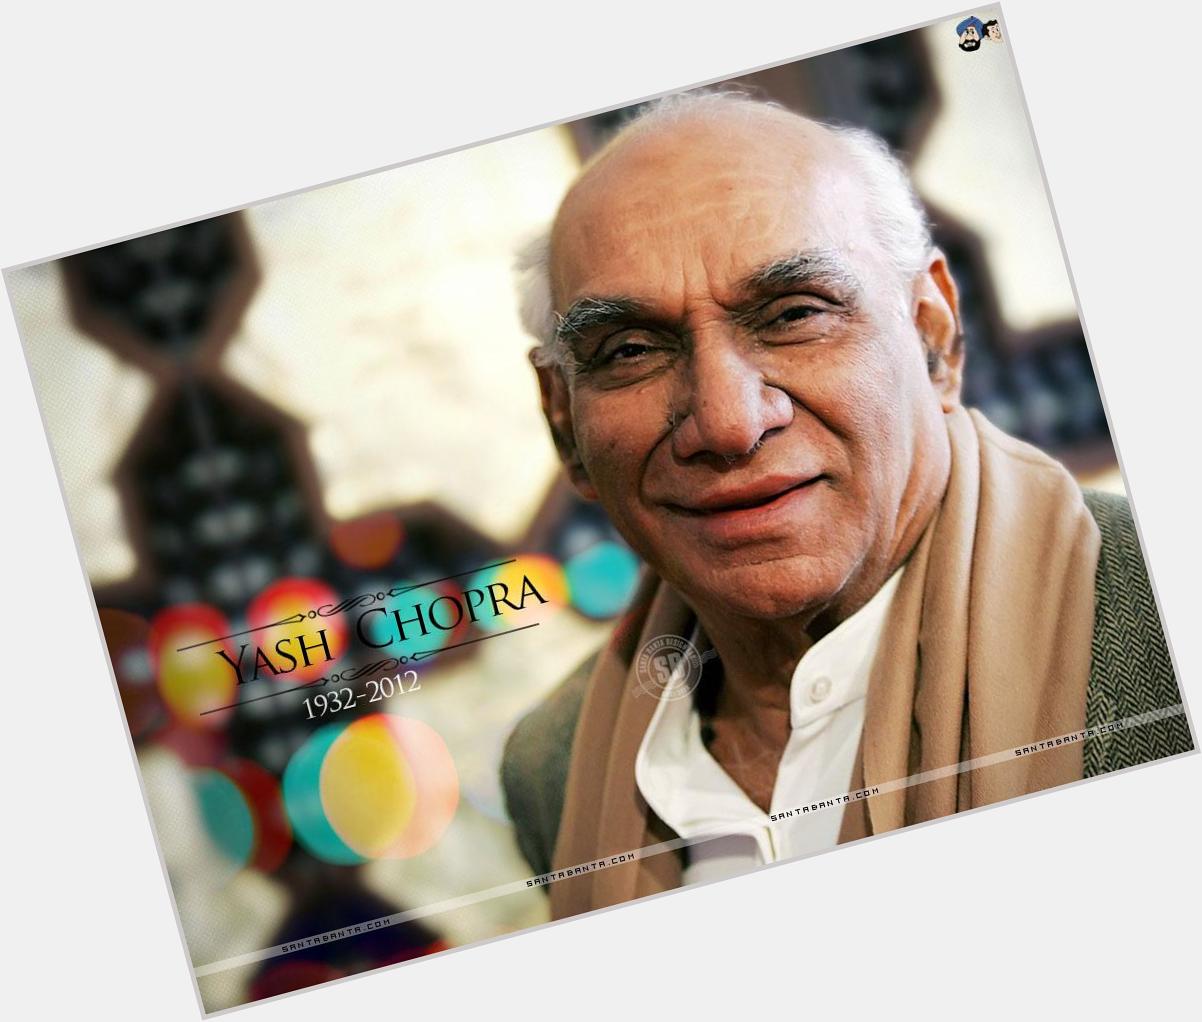 Happy birthday to Yash Chopra, one of the most amazing people in the movie industry.  